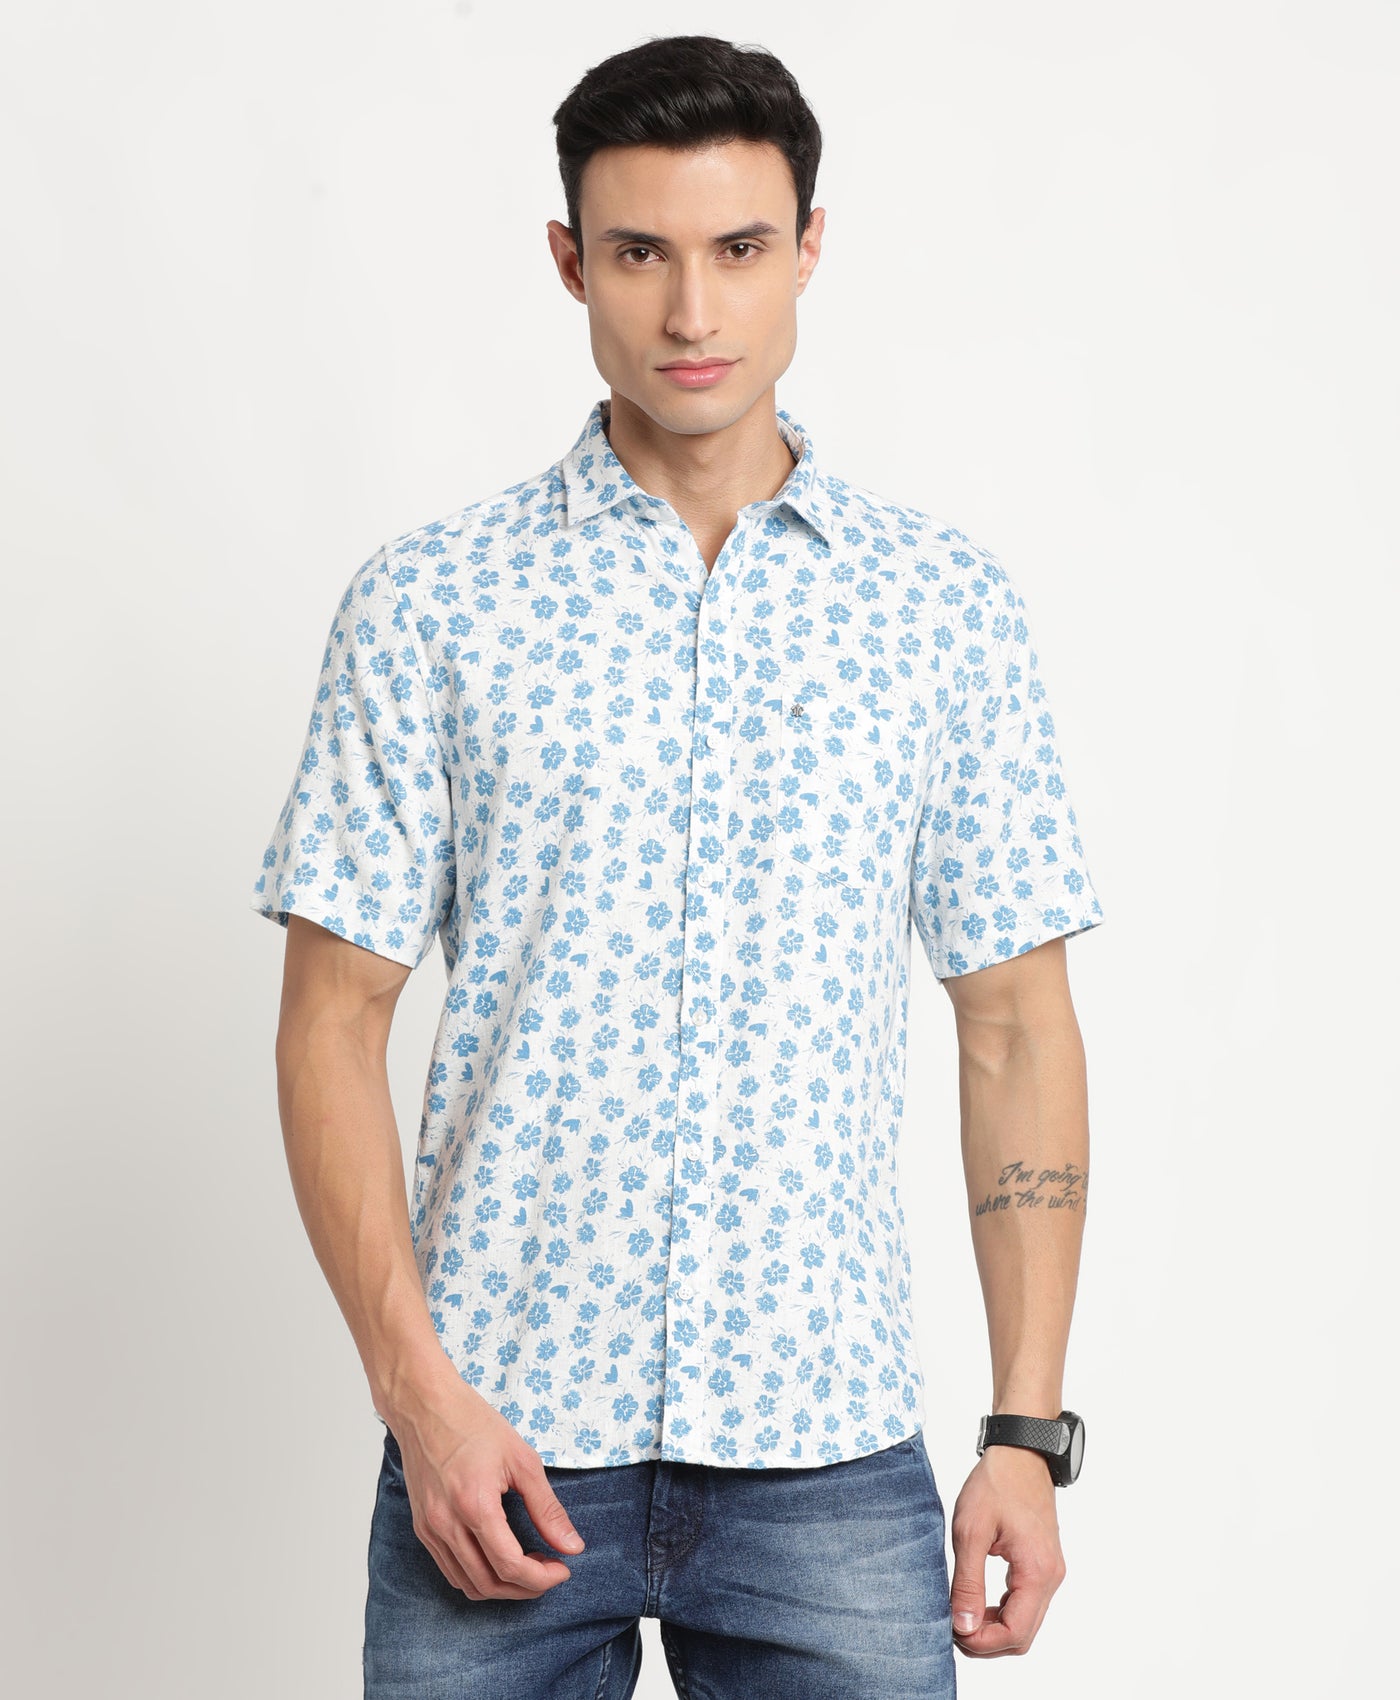 Excel Linen White Printed Slim Fit Half Sleeve Casual Shirt